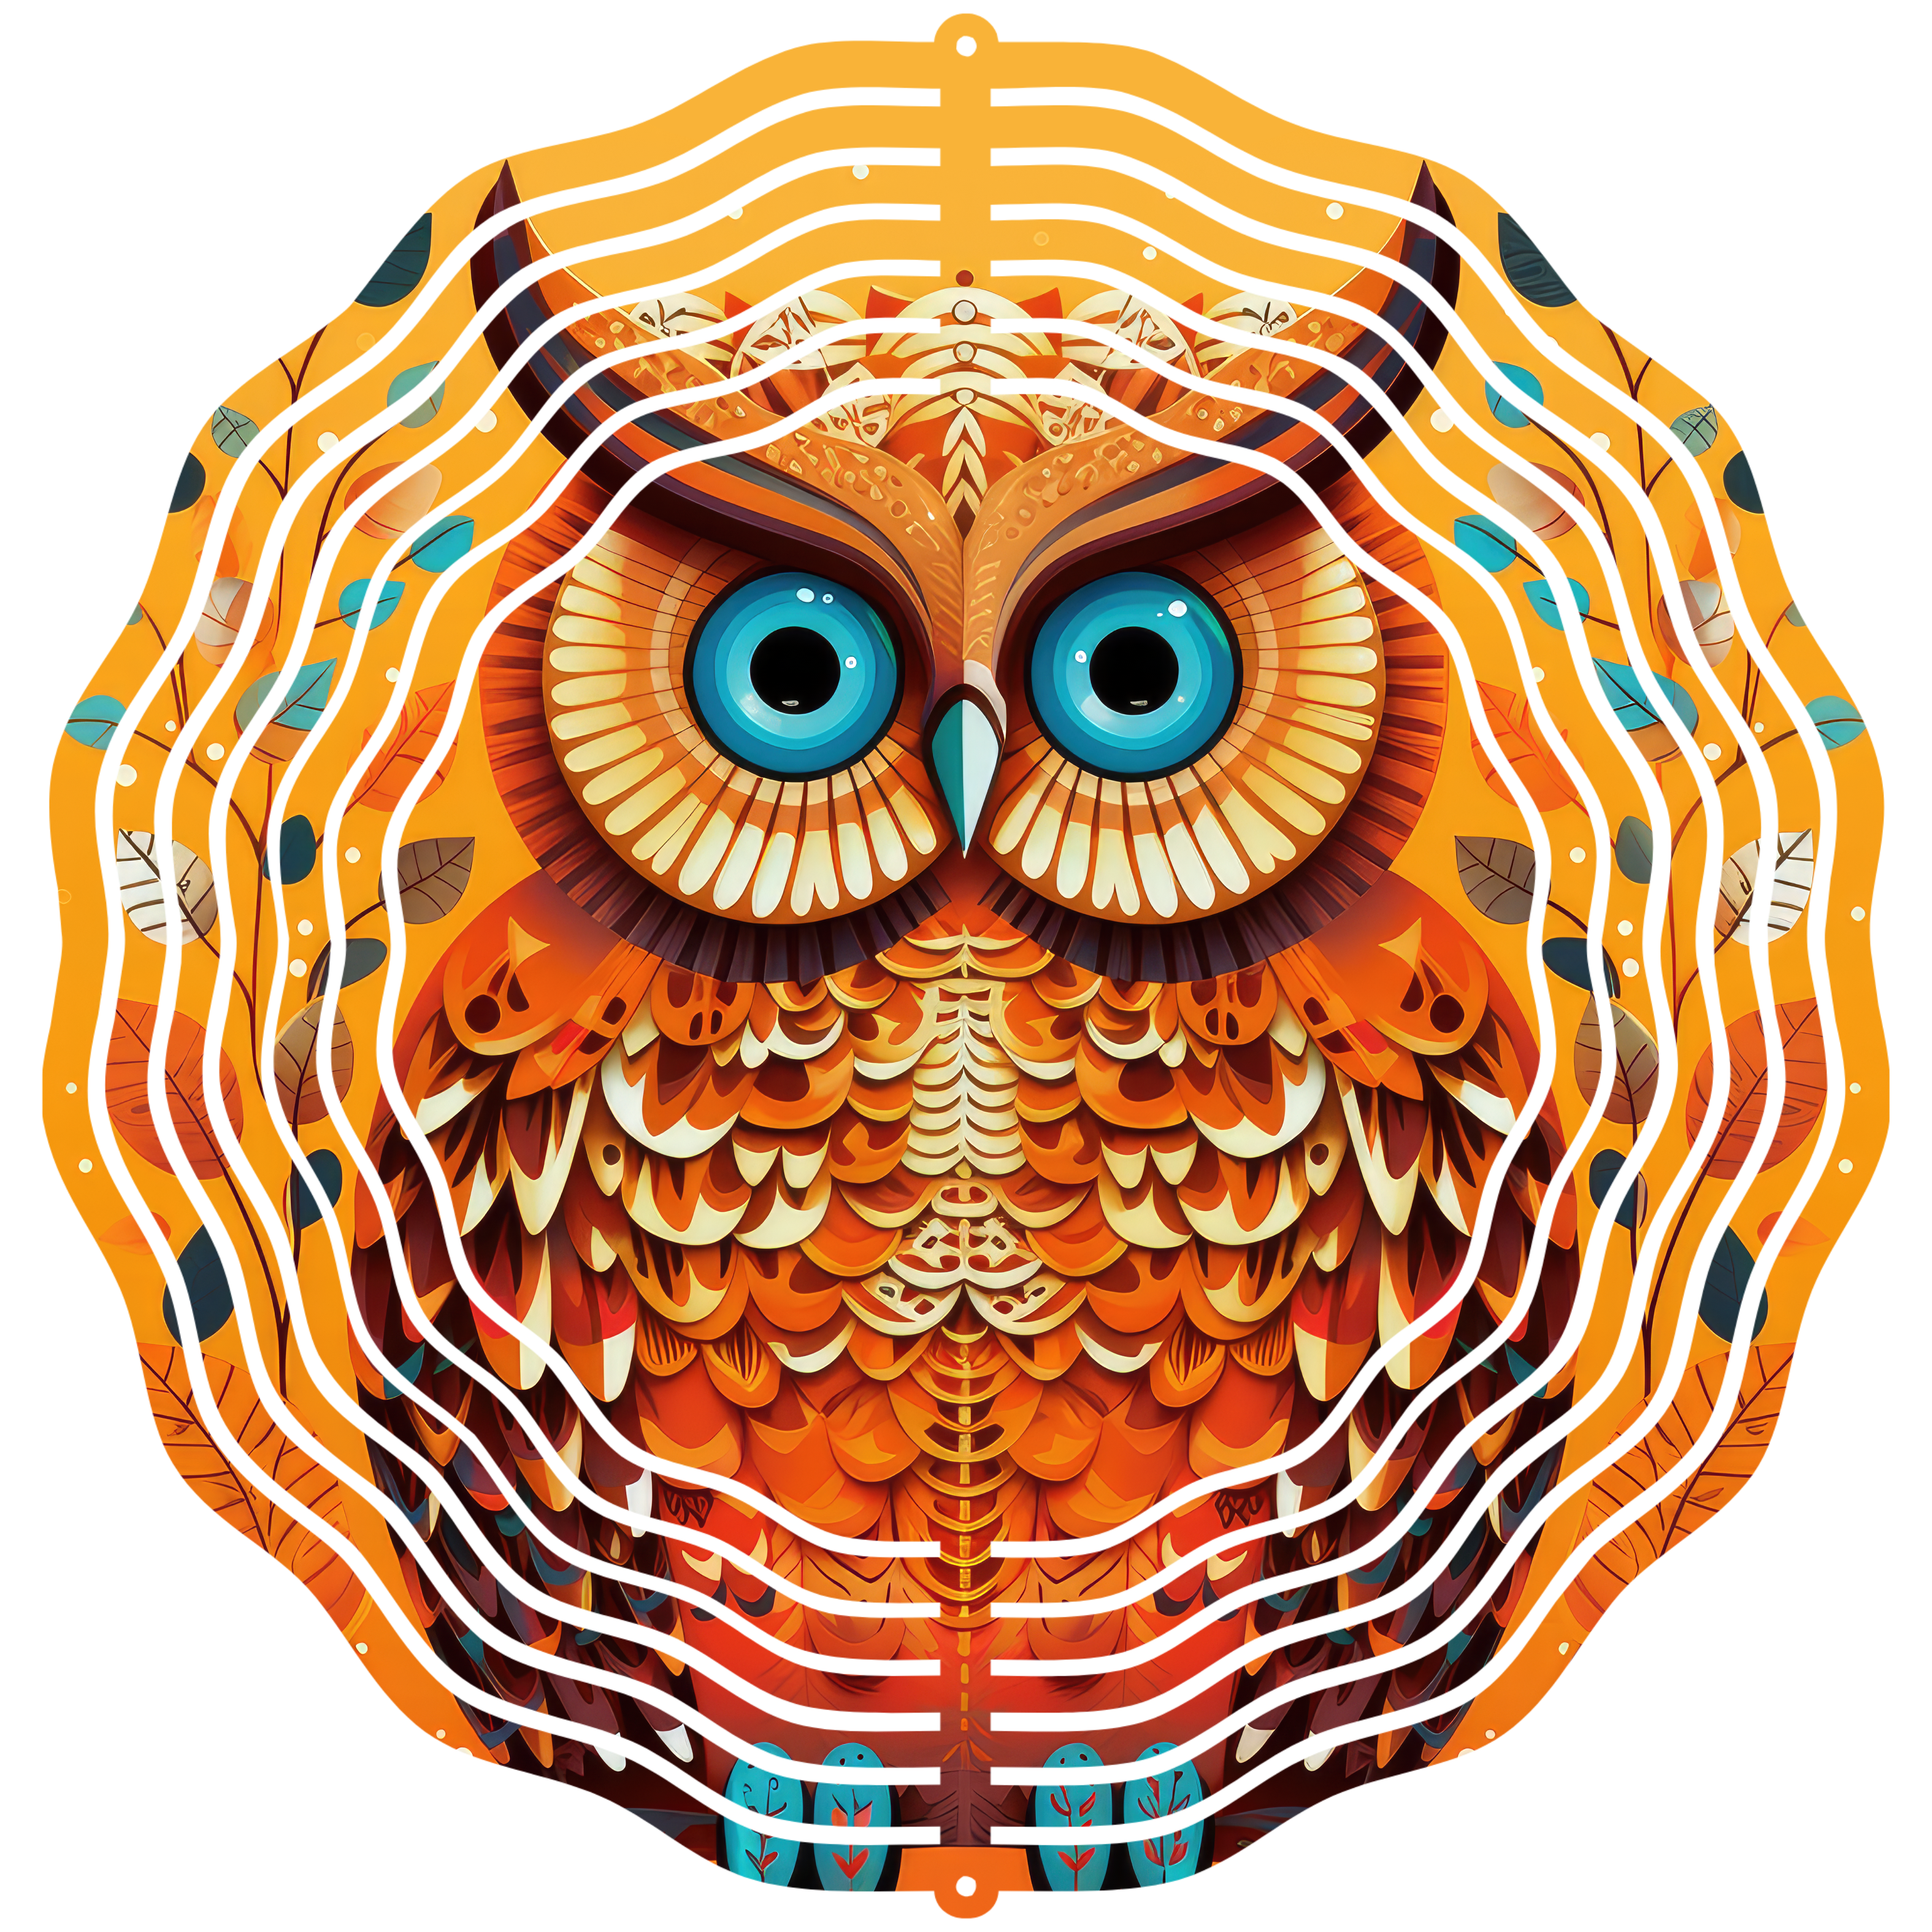 Mockup of an aluminum wind spinner with a blue eyed owl